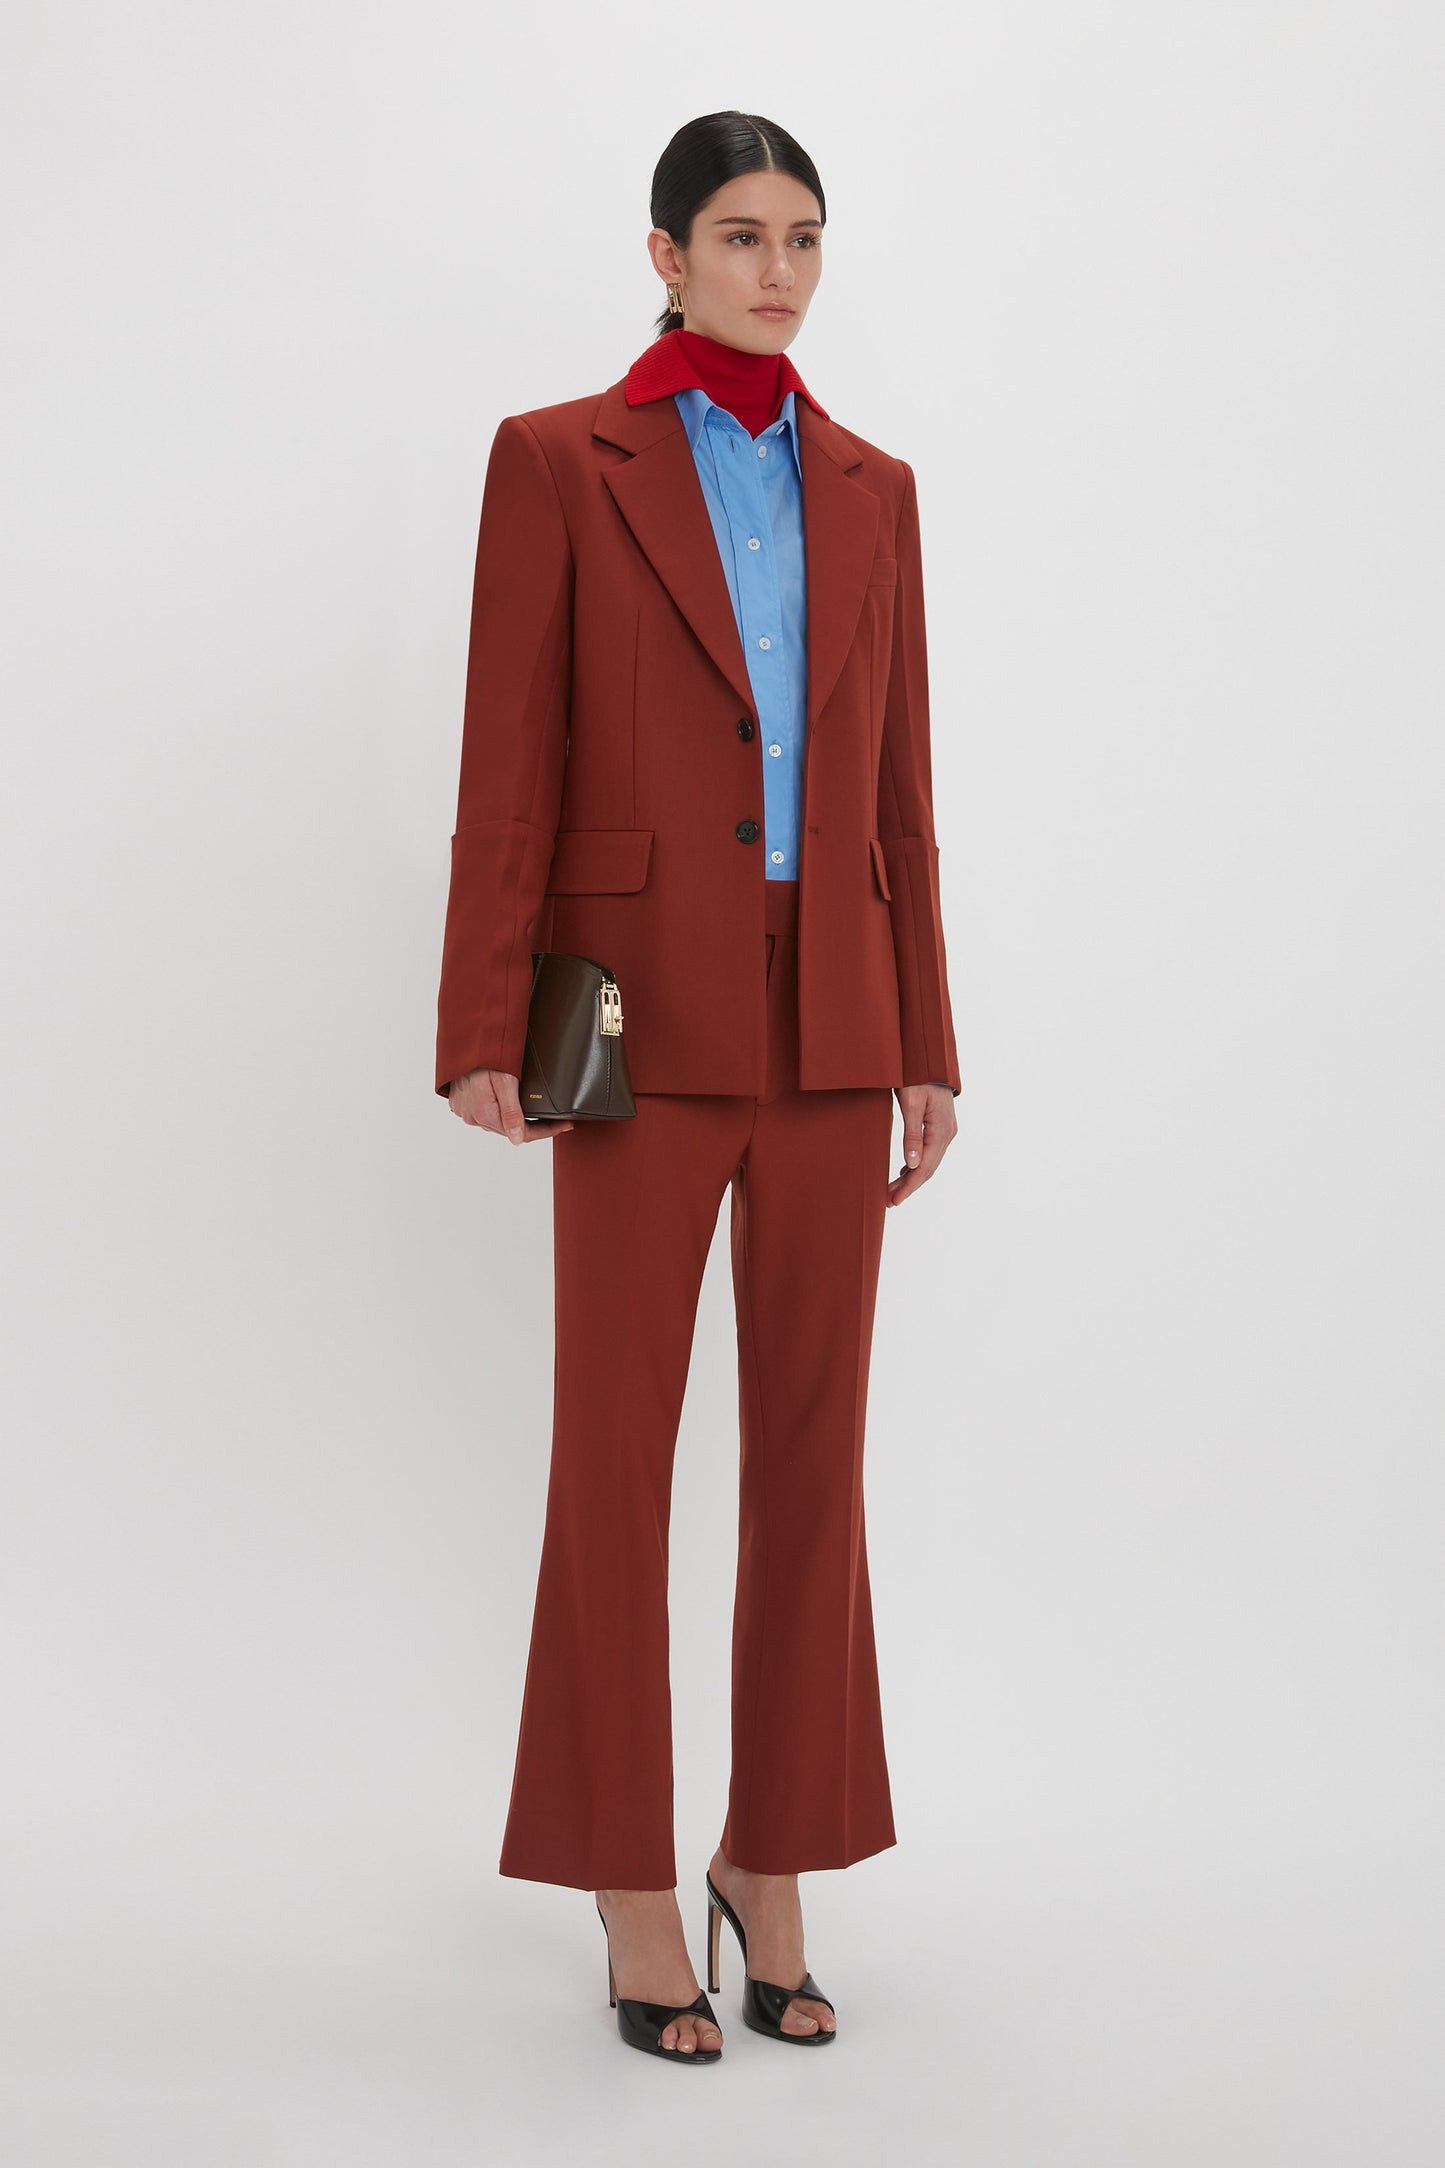 Person stands against a plain background wearing a red Sleeve Detail Patch Pocket Jacket In Russet by Victoria Beckham, a blue shirt, and black heels. They hold a brown handbag and have a red scarf tied around their neck, showcasing contemporary detailing.